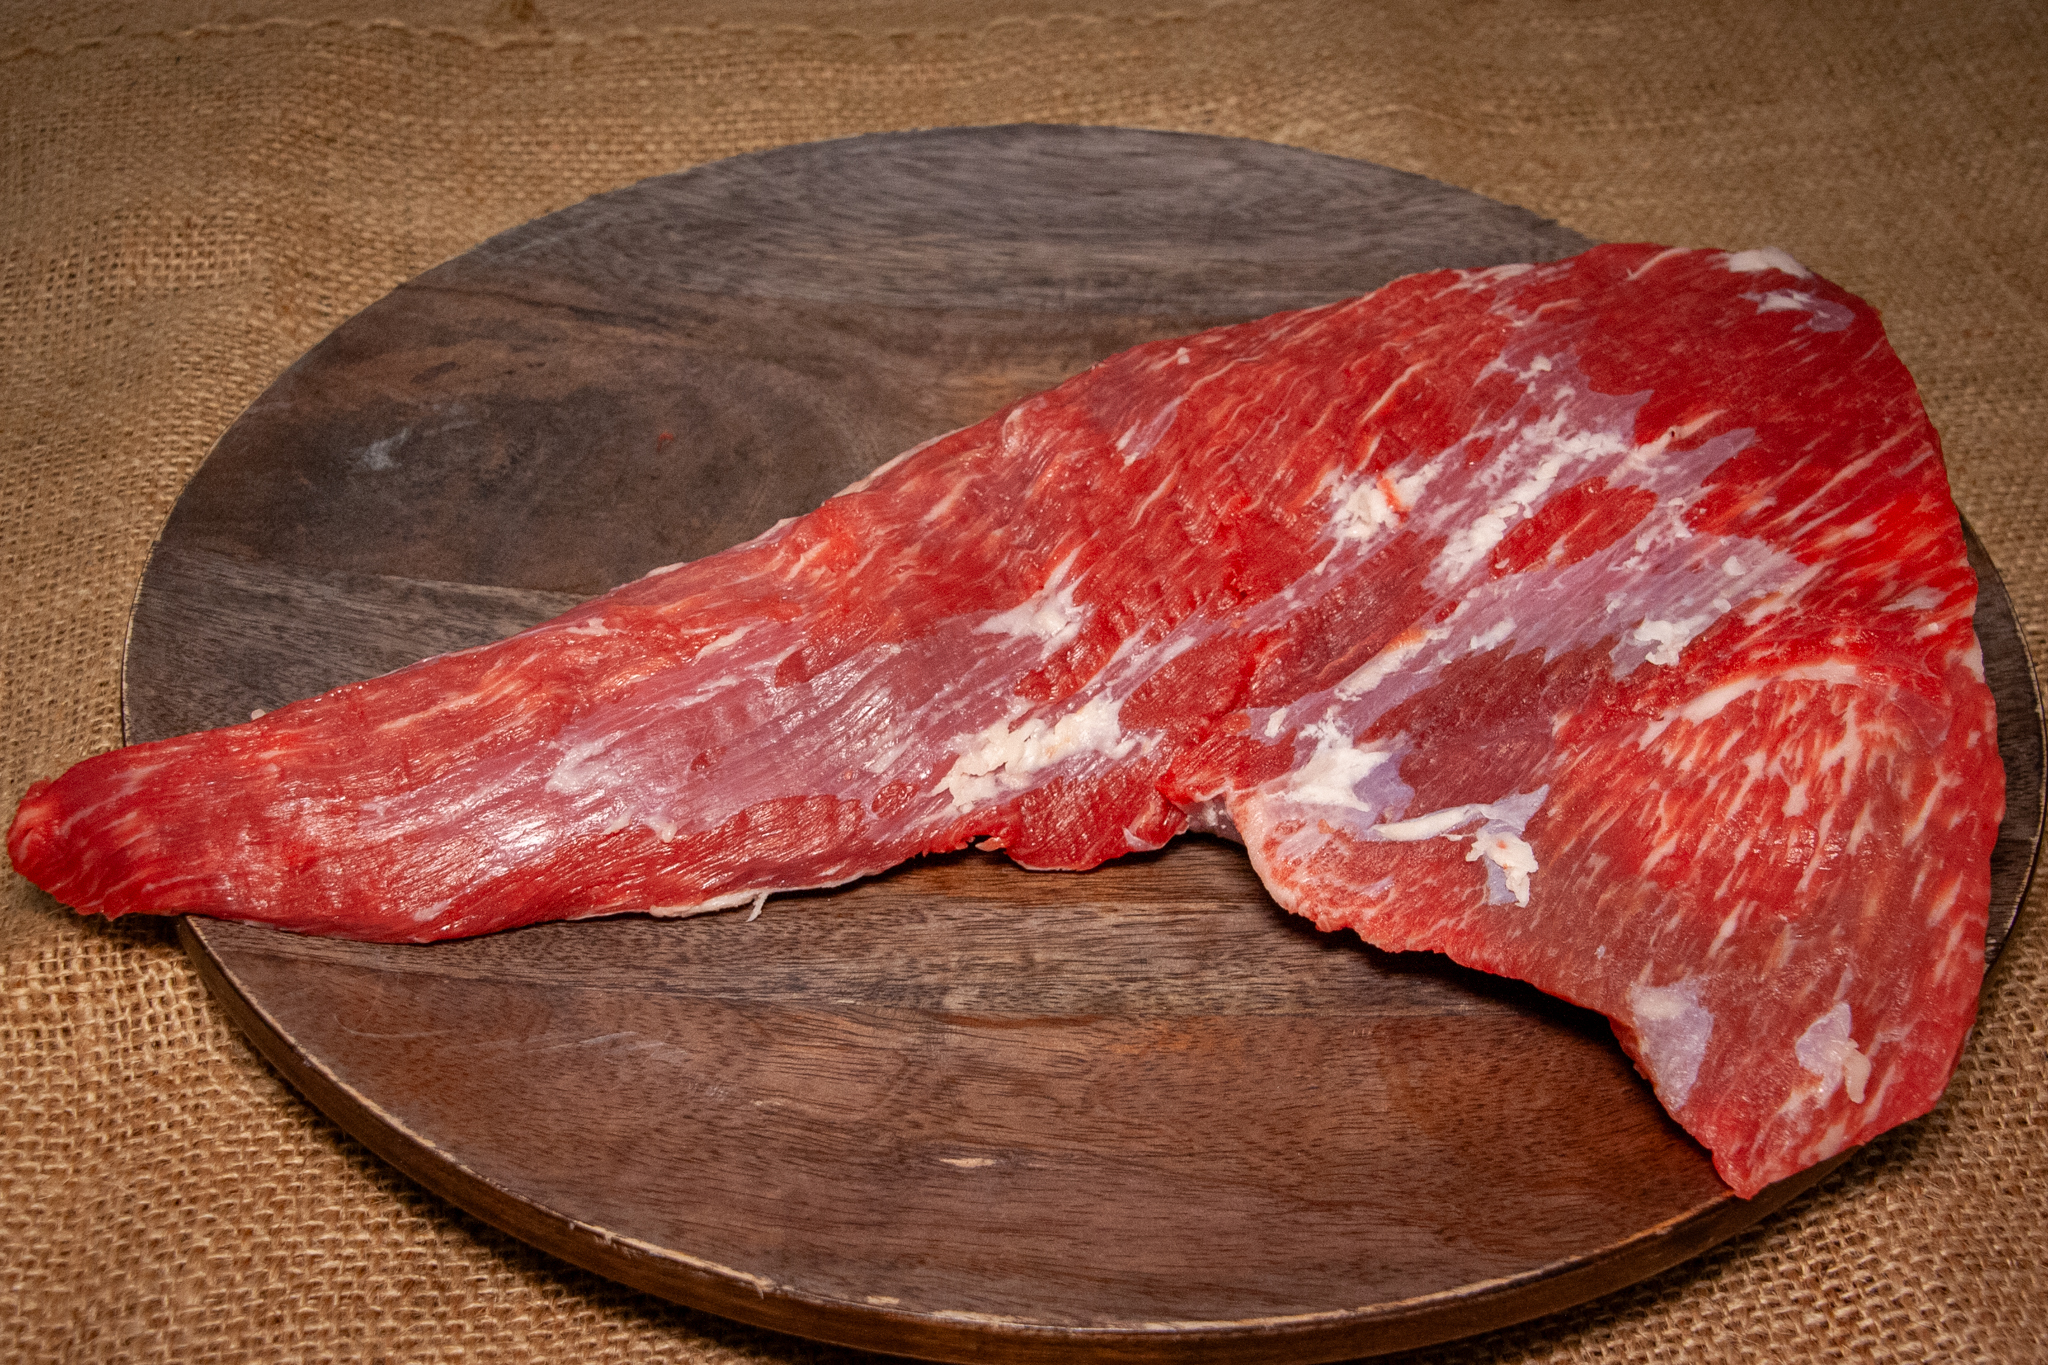 Ebert Grown USDA graded Tri Tip available at Salmon's Meat Products and online for shipping